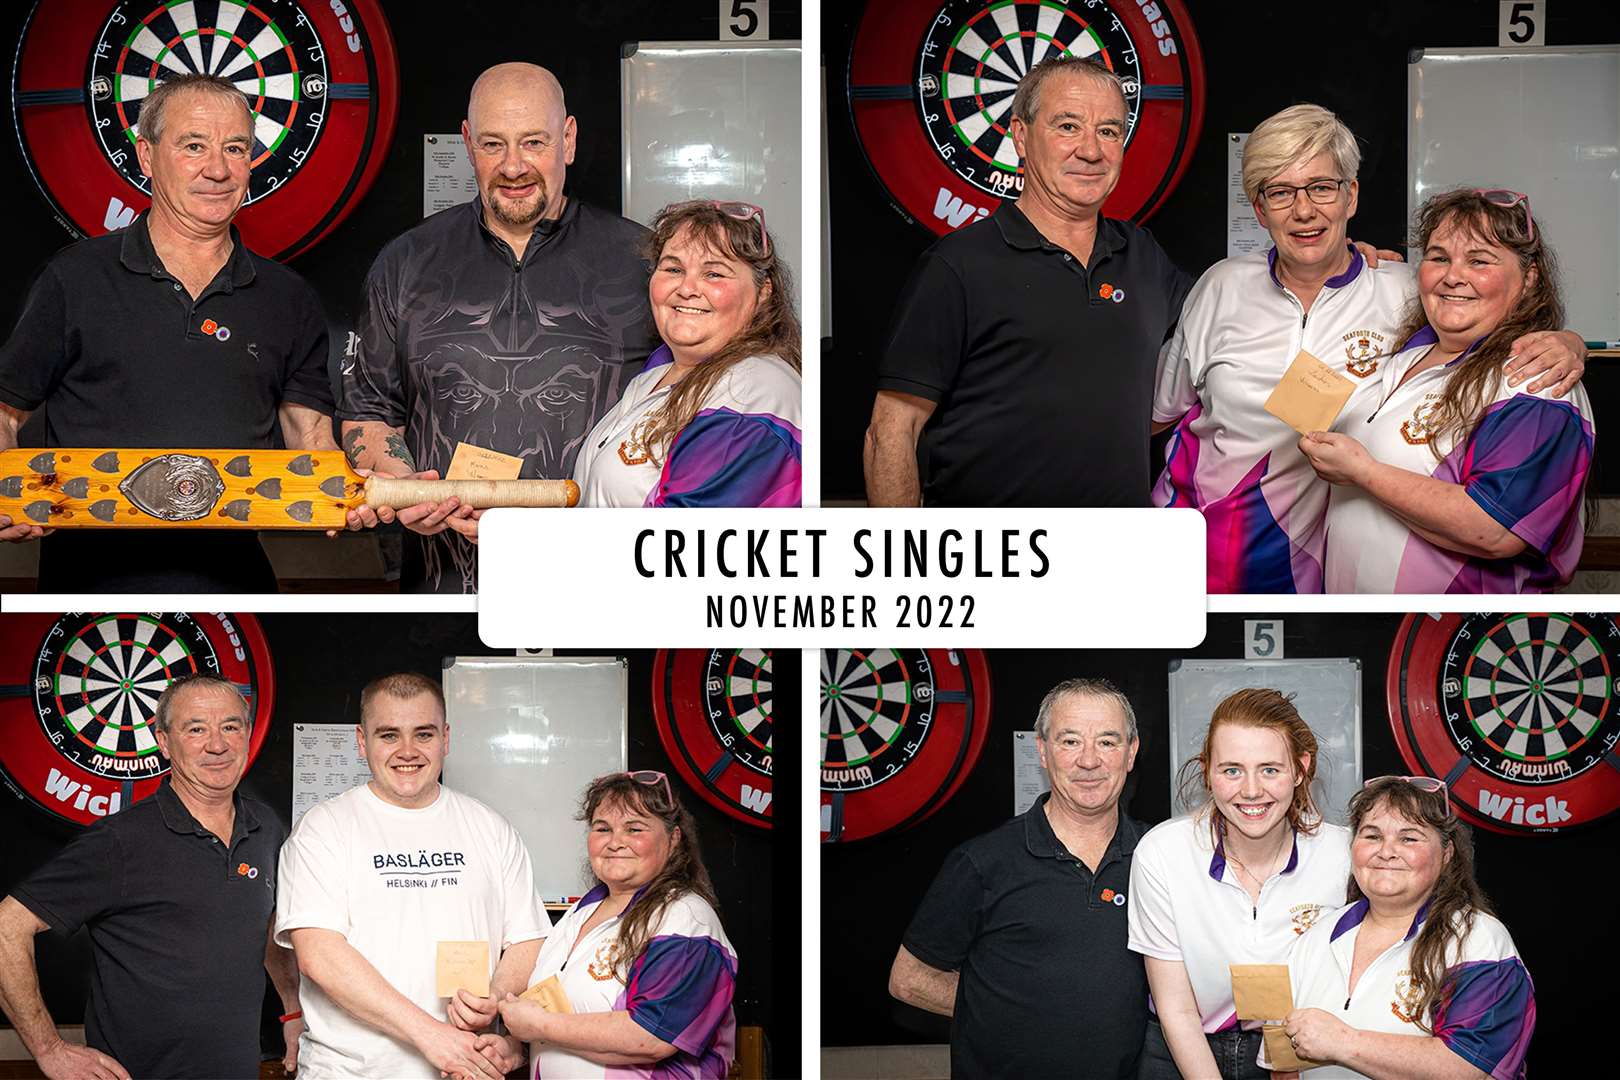 Winners Kevin Donald and Freda Perry with David Miller and Julie Harper at this week's Cricket Singles in the Seaforth Club. Pictures: Saulius Kazakauskas